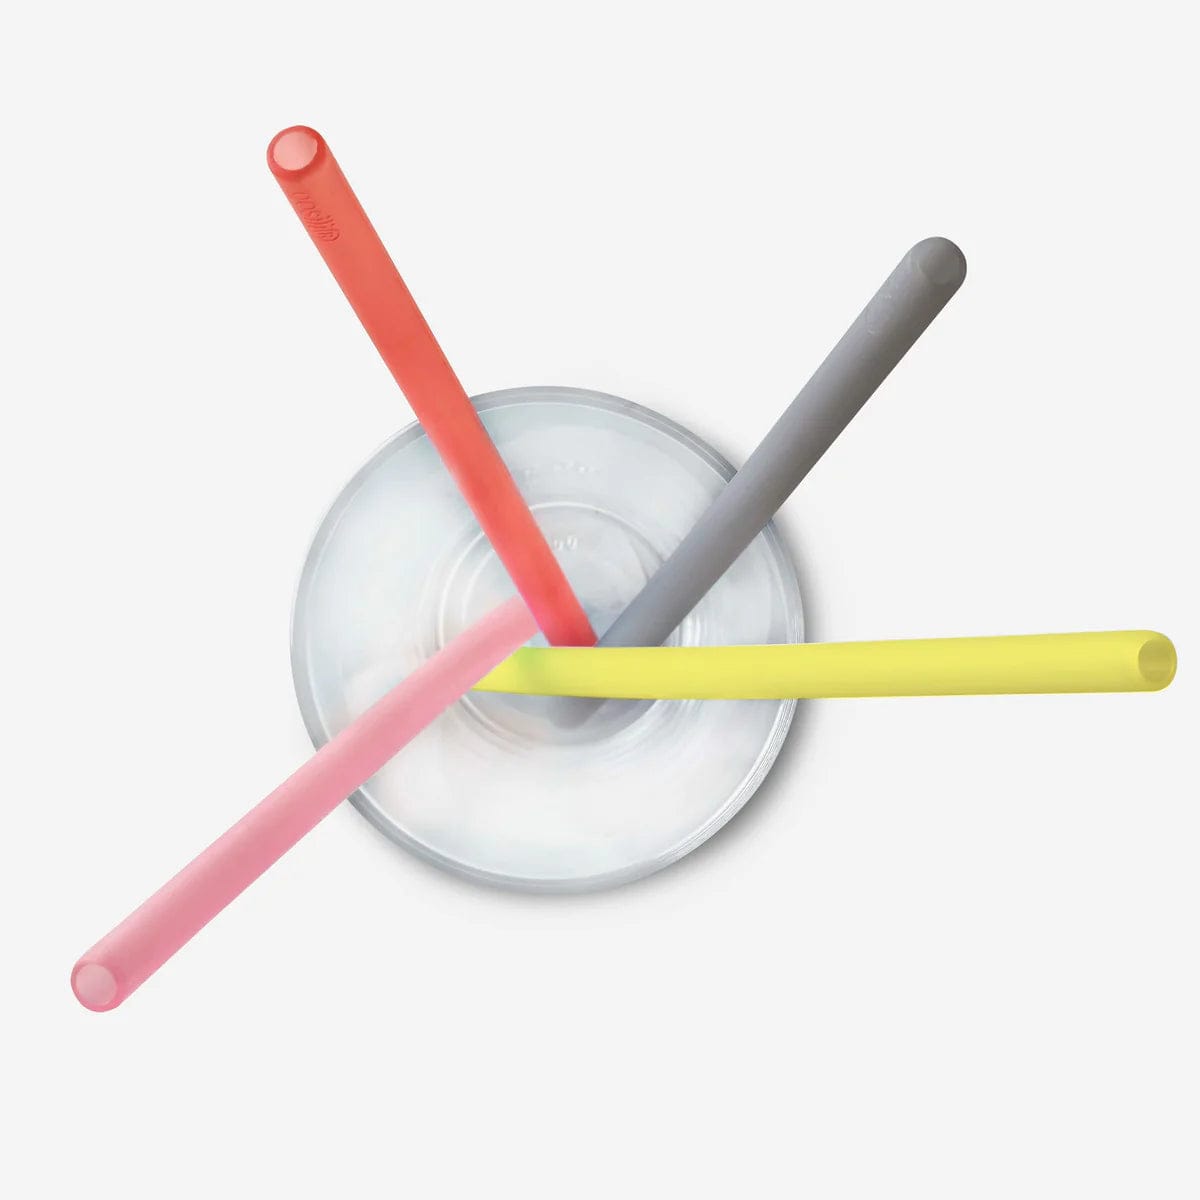 https://www.liltulips.com/cdn/shop/files/x-long-reusable-silicone-straws-pink-yellow-gray-red-4pk-silikids-lil-tulips-30921202335862.webp?v=1698284462&width=1200